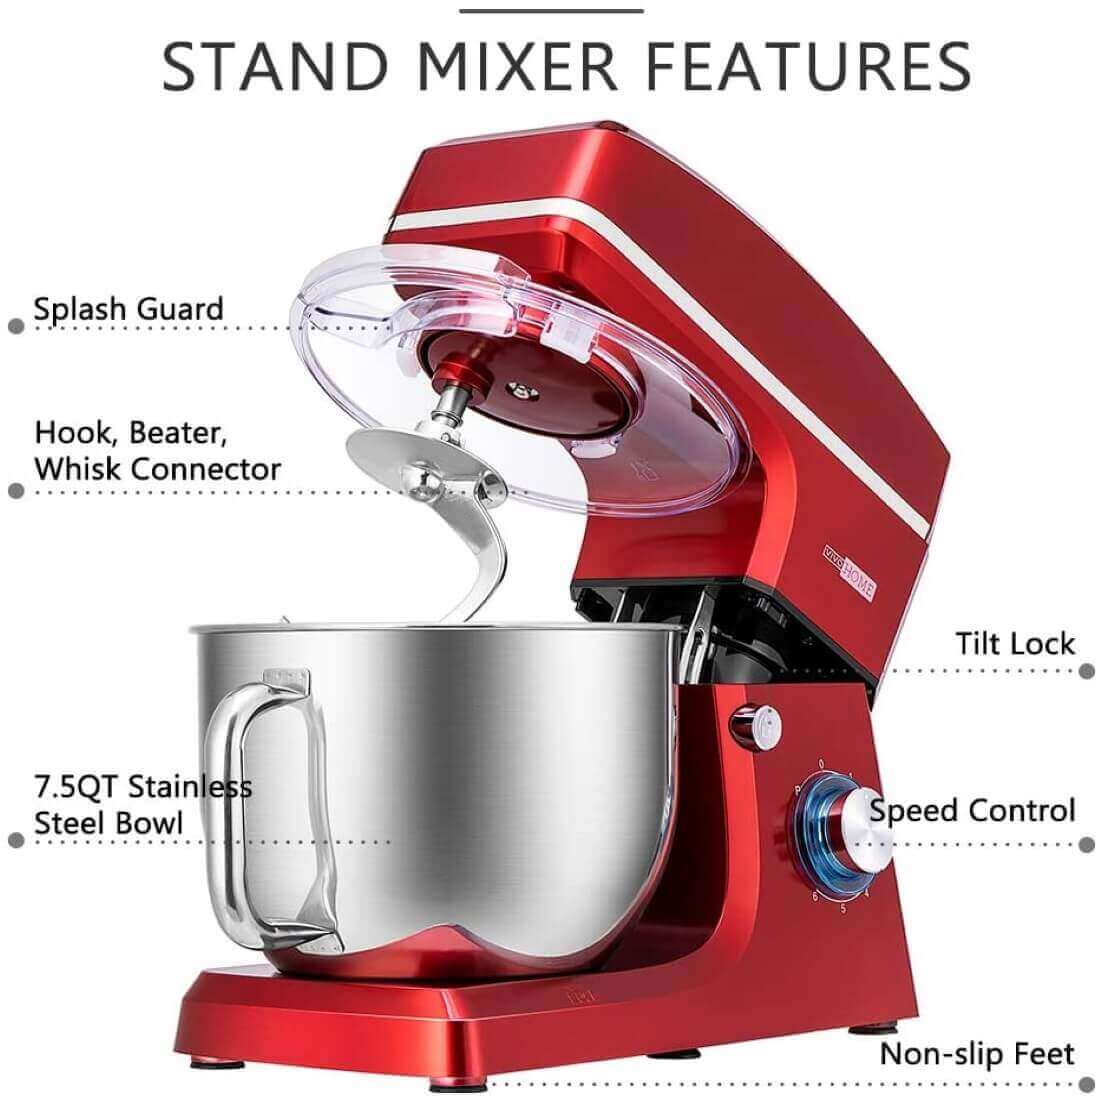 Aucma Stand Mixer,6.5-QT 660W 6-Speed Tilt-Head Food Mixer, Kitchen  Electric Mixer with Dough Hook, Wire Whip & Beater 2 Layer Red Painting  (6.5QT